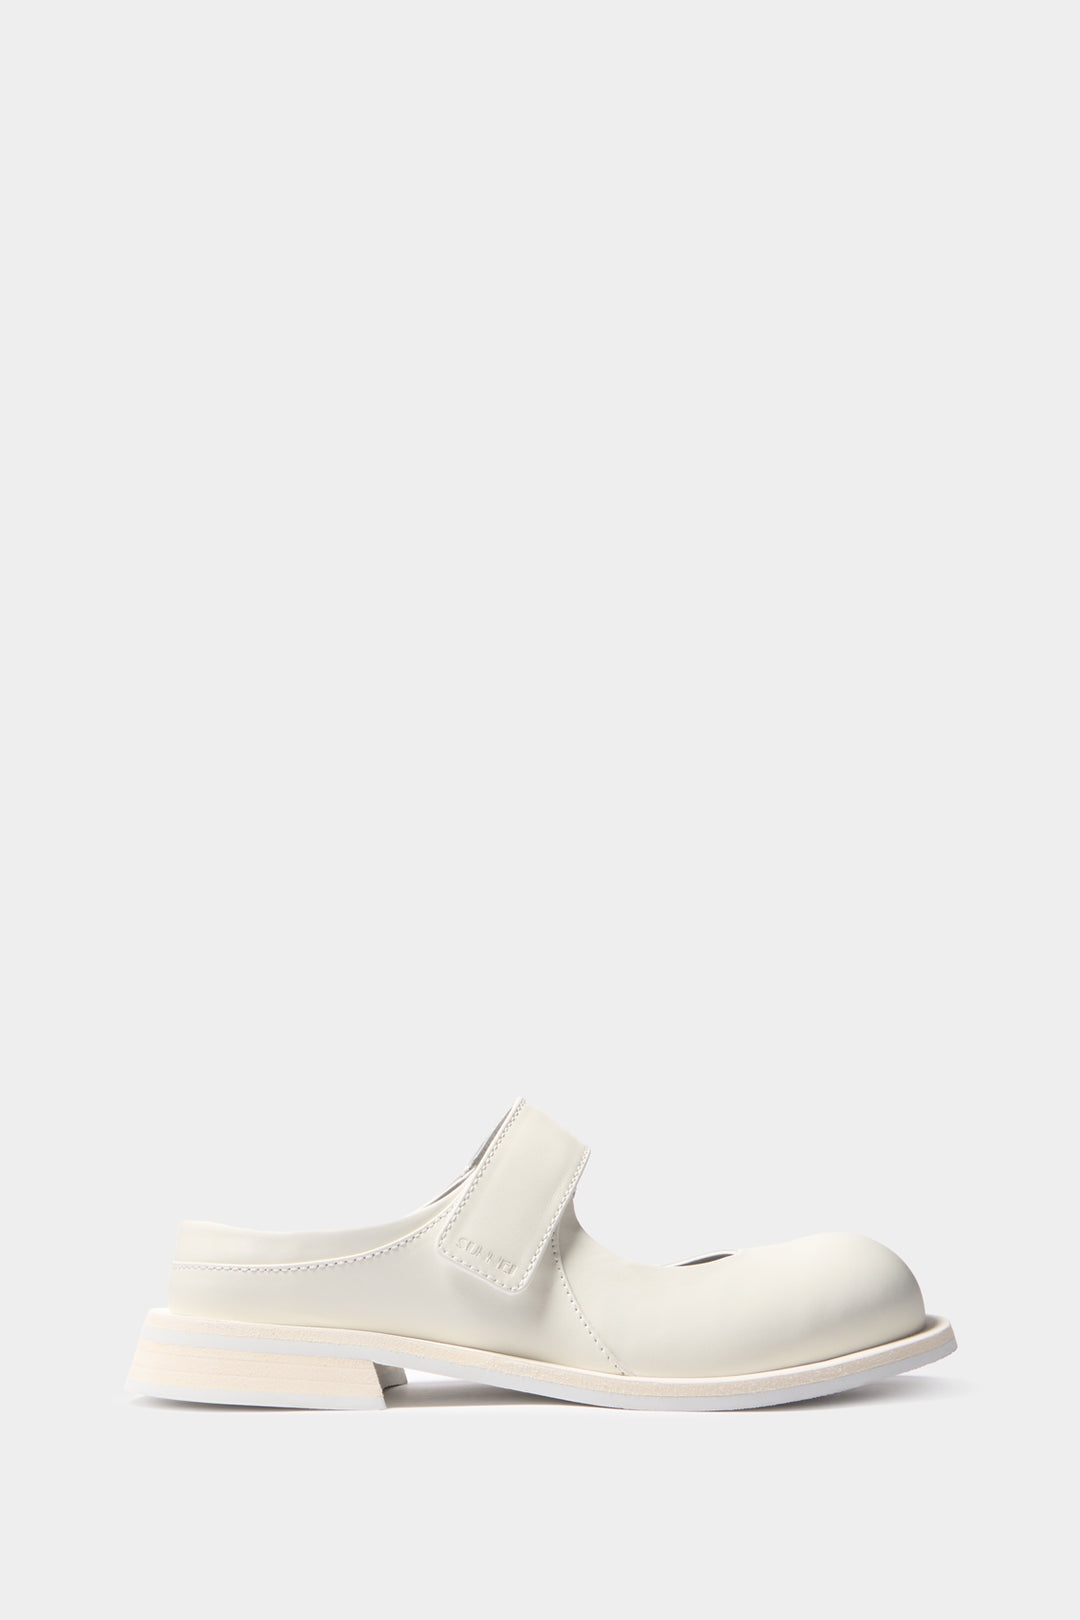 FORM MARG SABOT SHOES / off white - 1